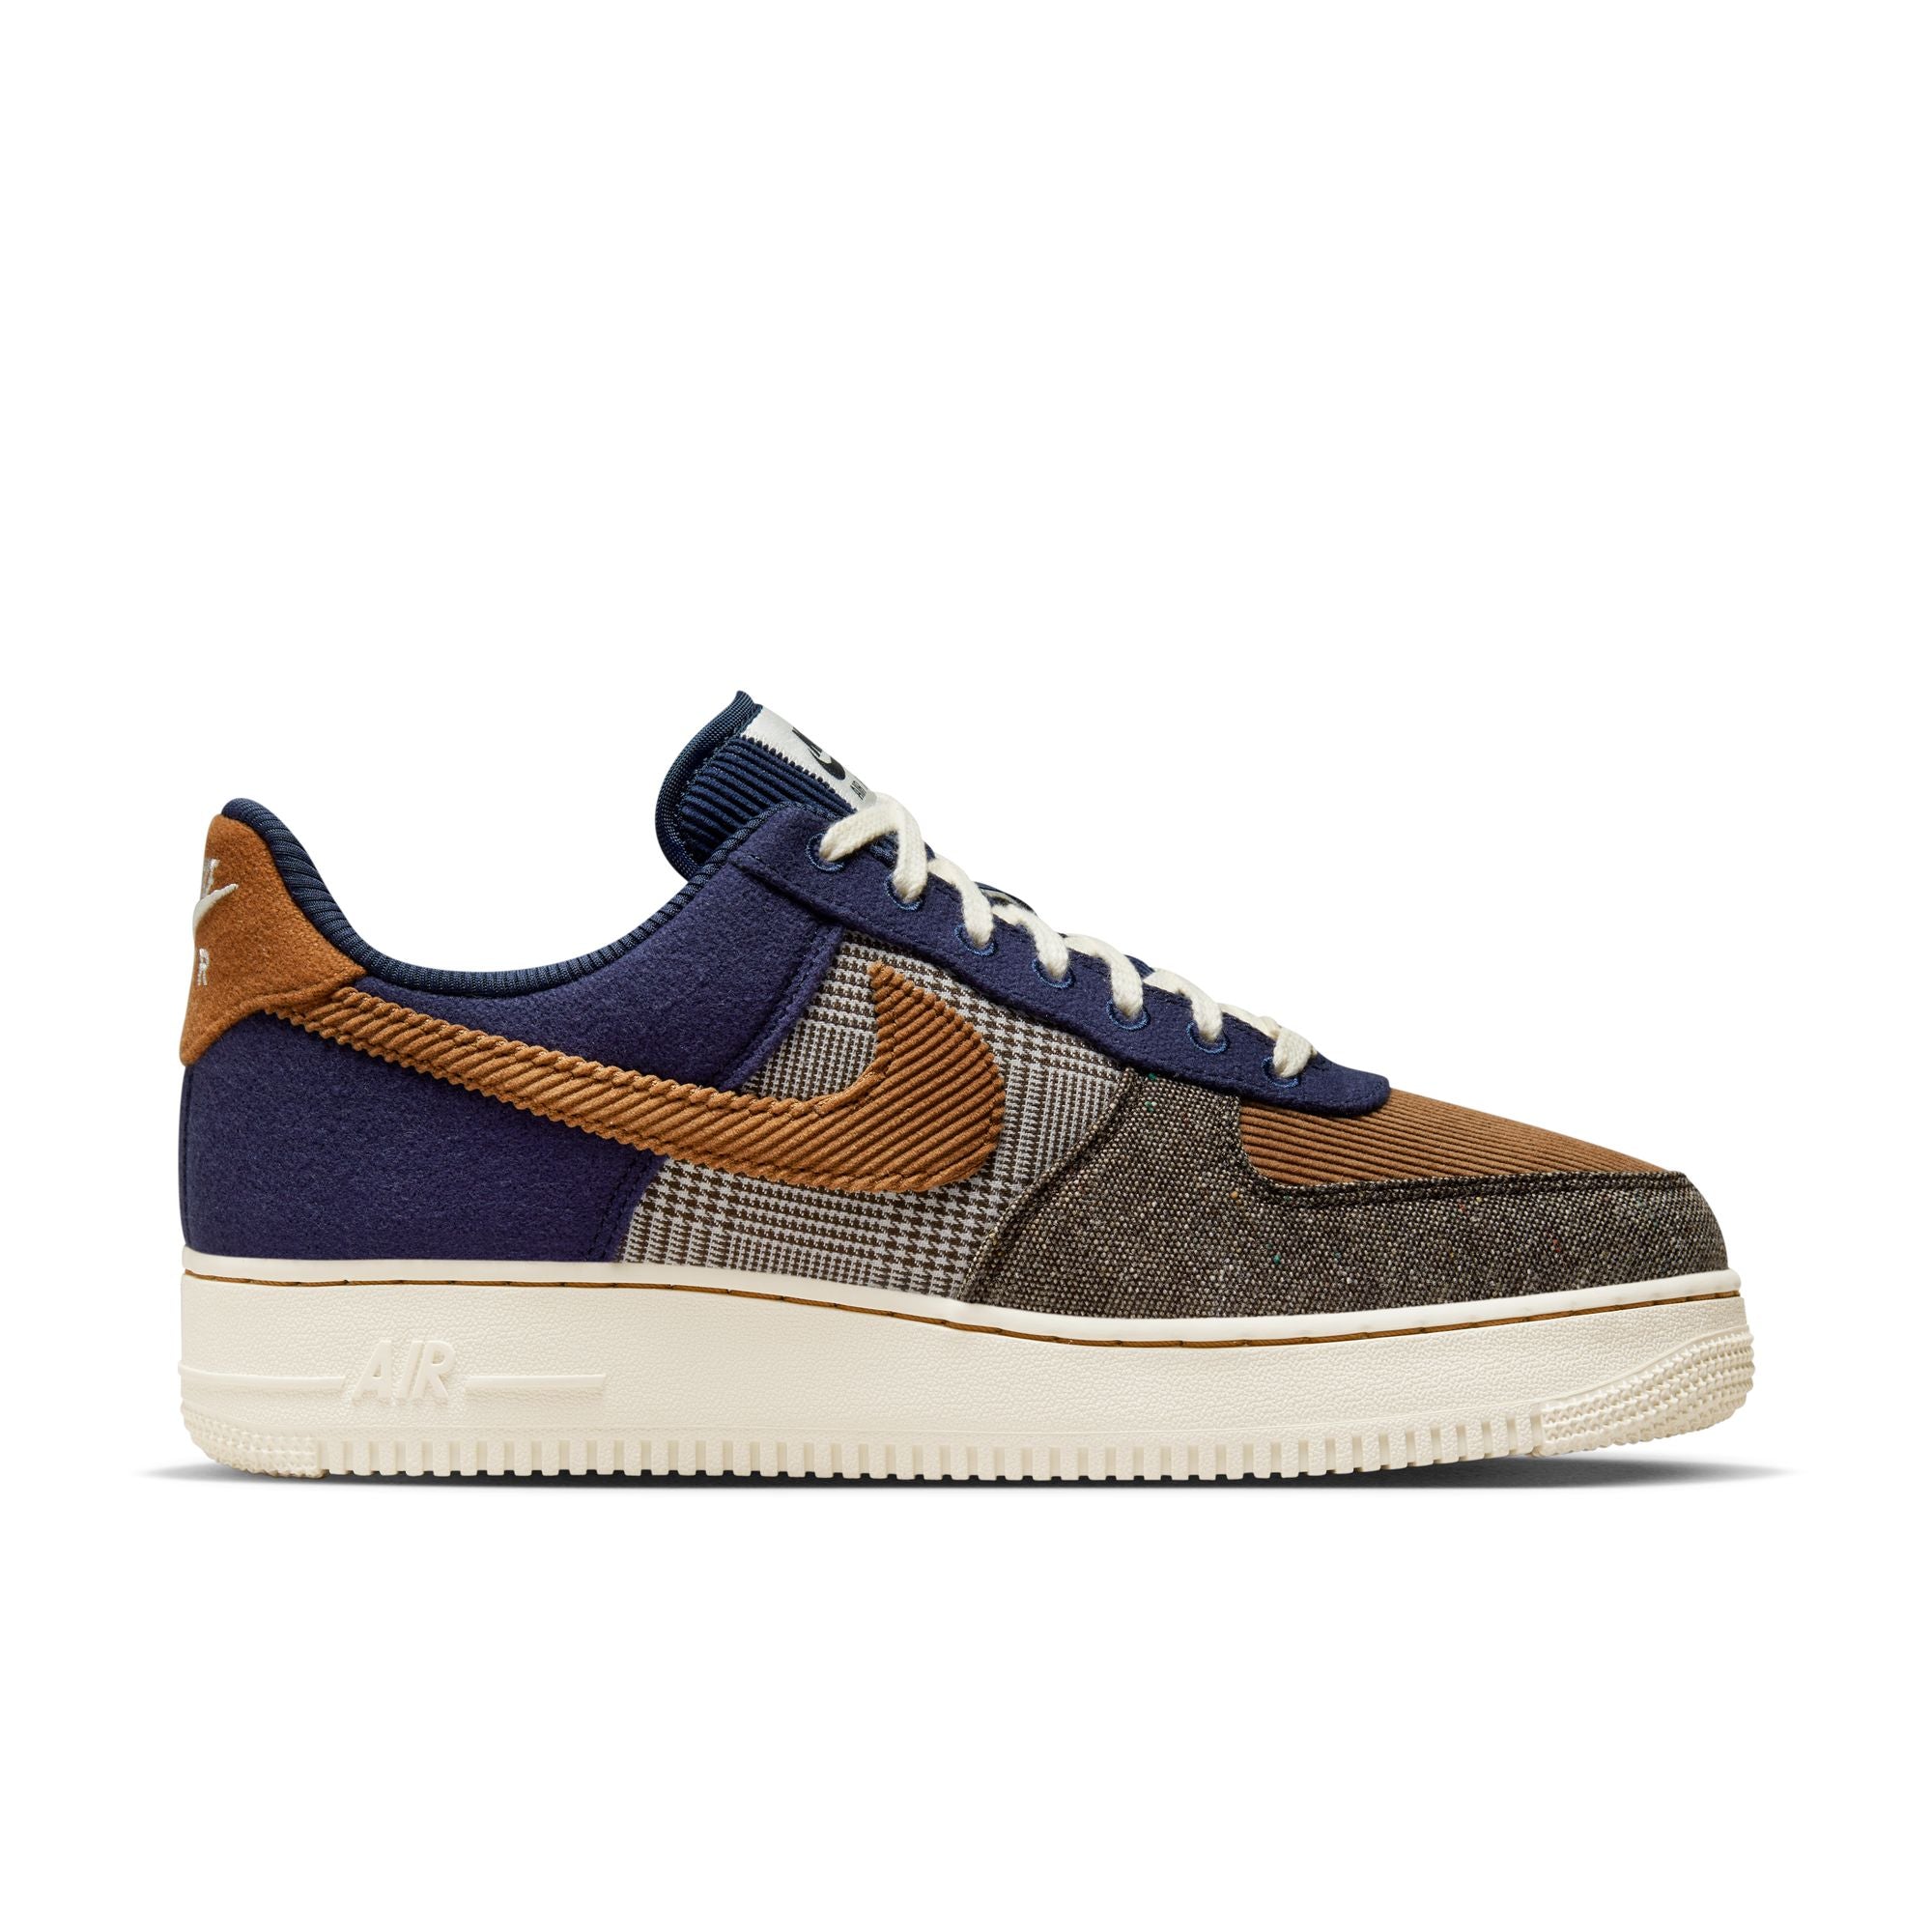 NIKE - Air Force 1 '07 Prm - (Midnight Navy/Ale Brown-Pale I